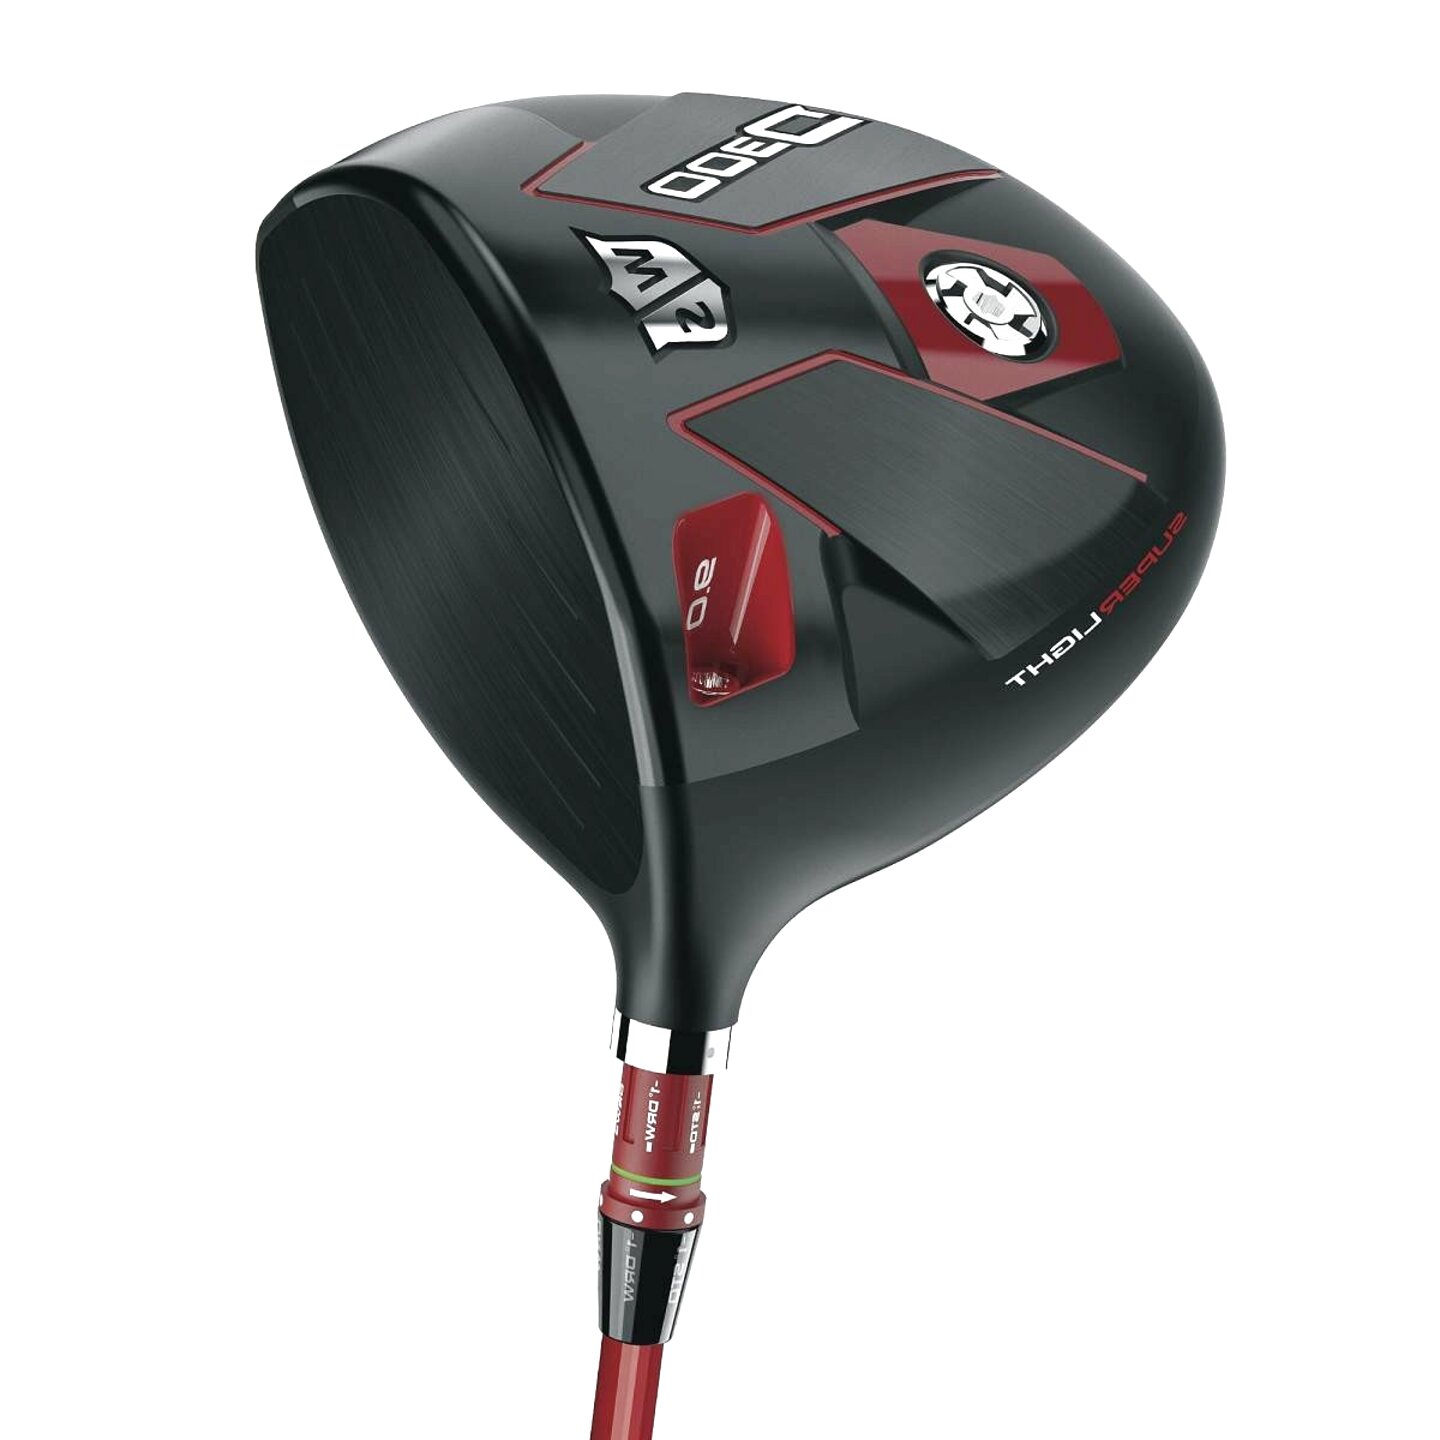 Wilson Golf Drivers for sale in UK 94 used Wilson Golf Drivers